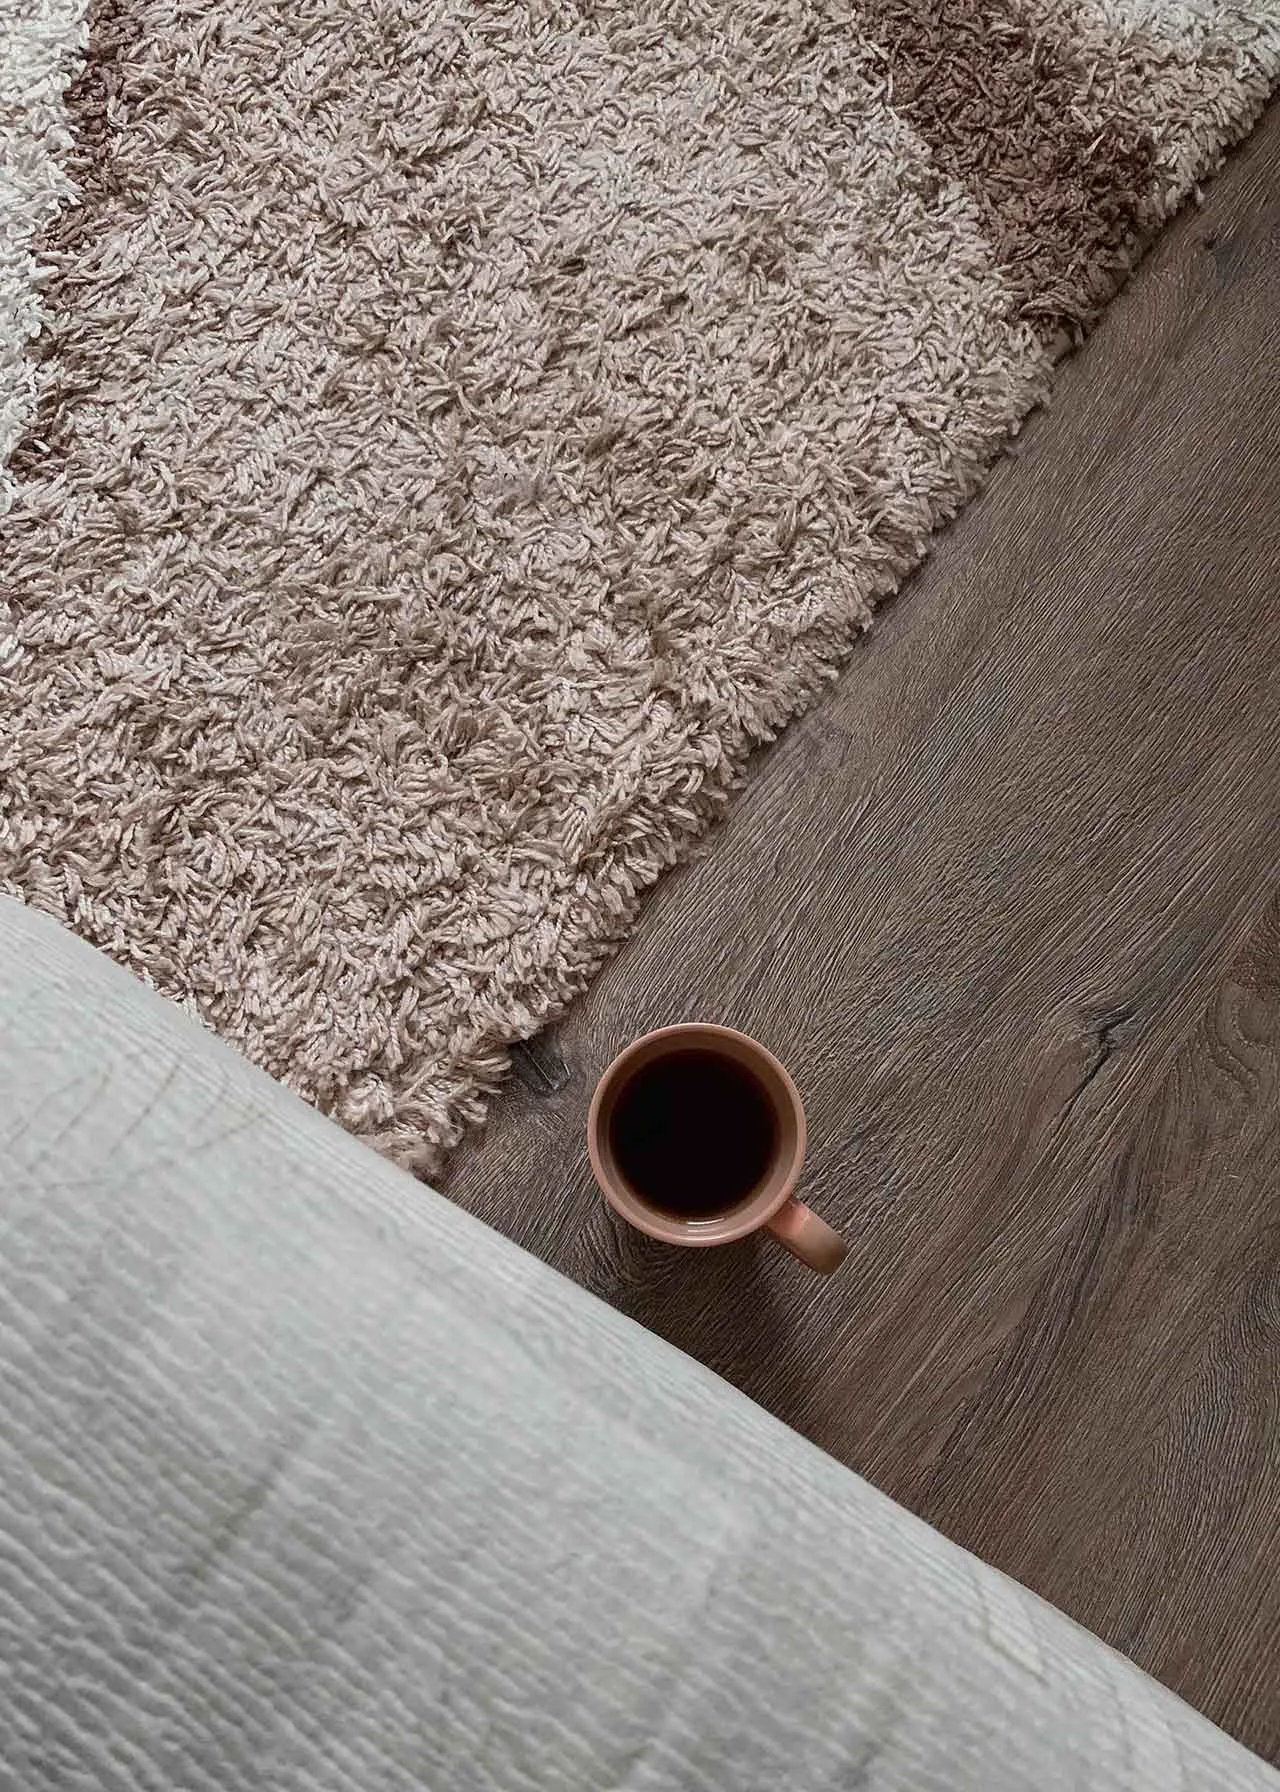 area rug cleaning Coquitlam